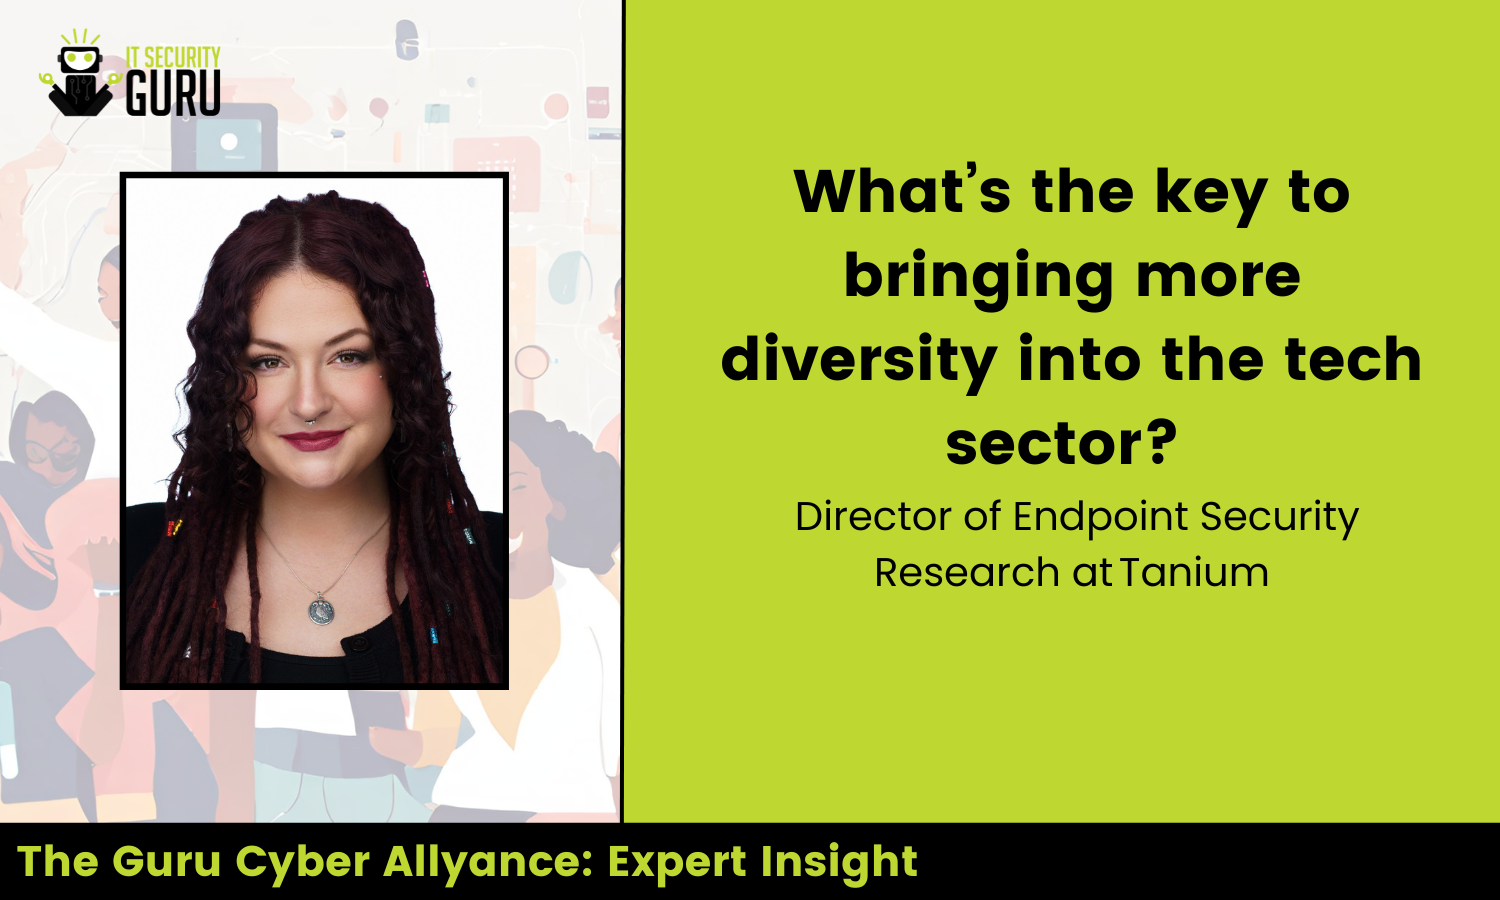 Expert Insight: The key to increasing diversity in the tech sector